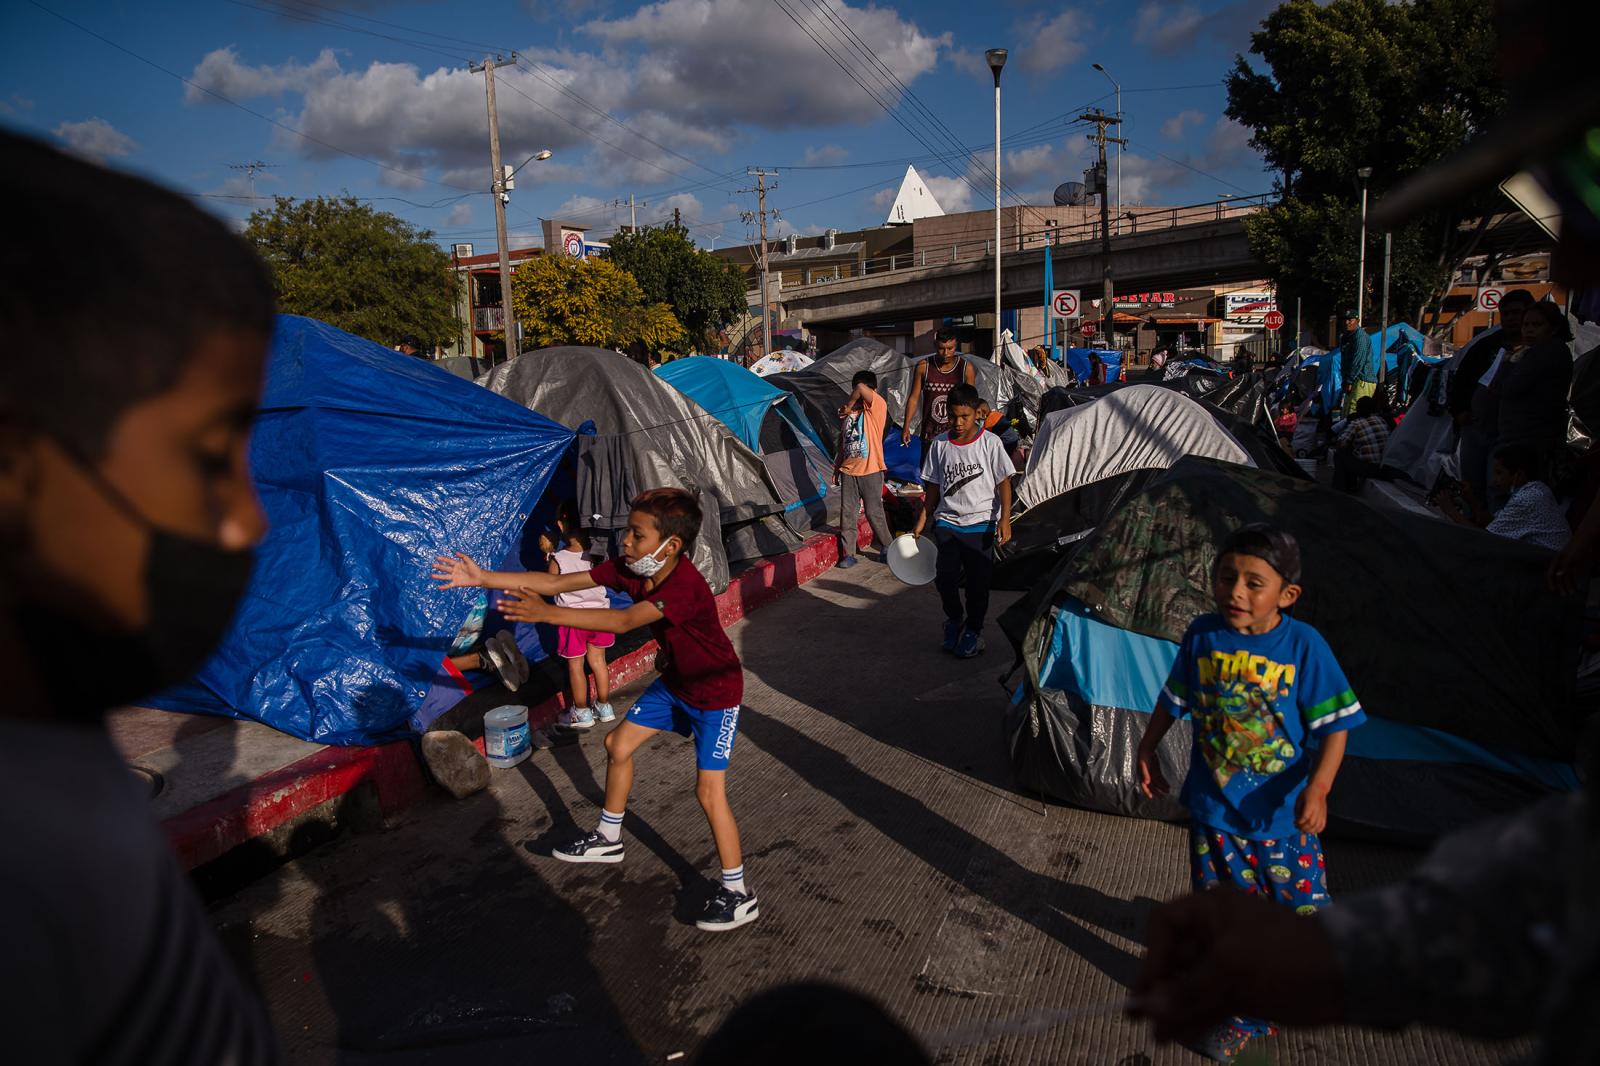 Children play at El Chaparral plaza in Tijuana, Mexico on March 21, 2021. Hundreds of asylum seekers have set up tents near the port of entry in hopes of being able to seek asylum in the United States.